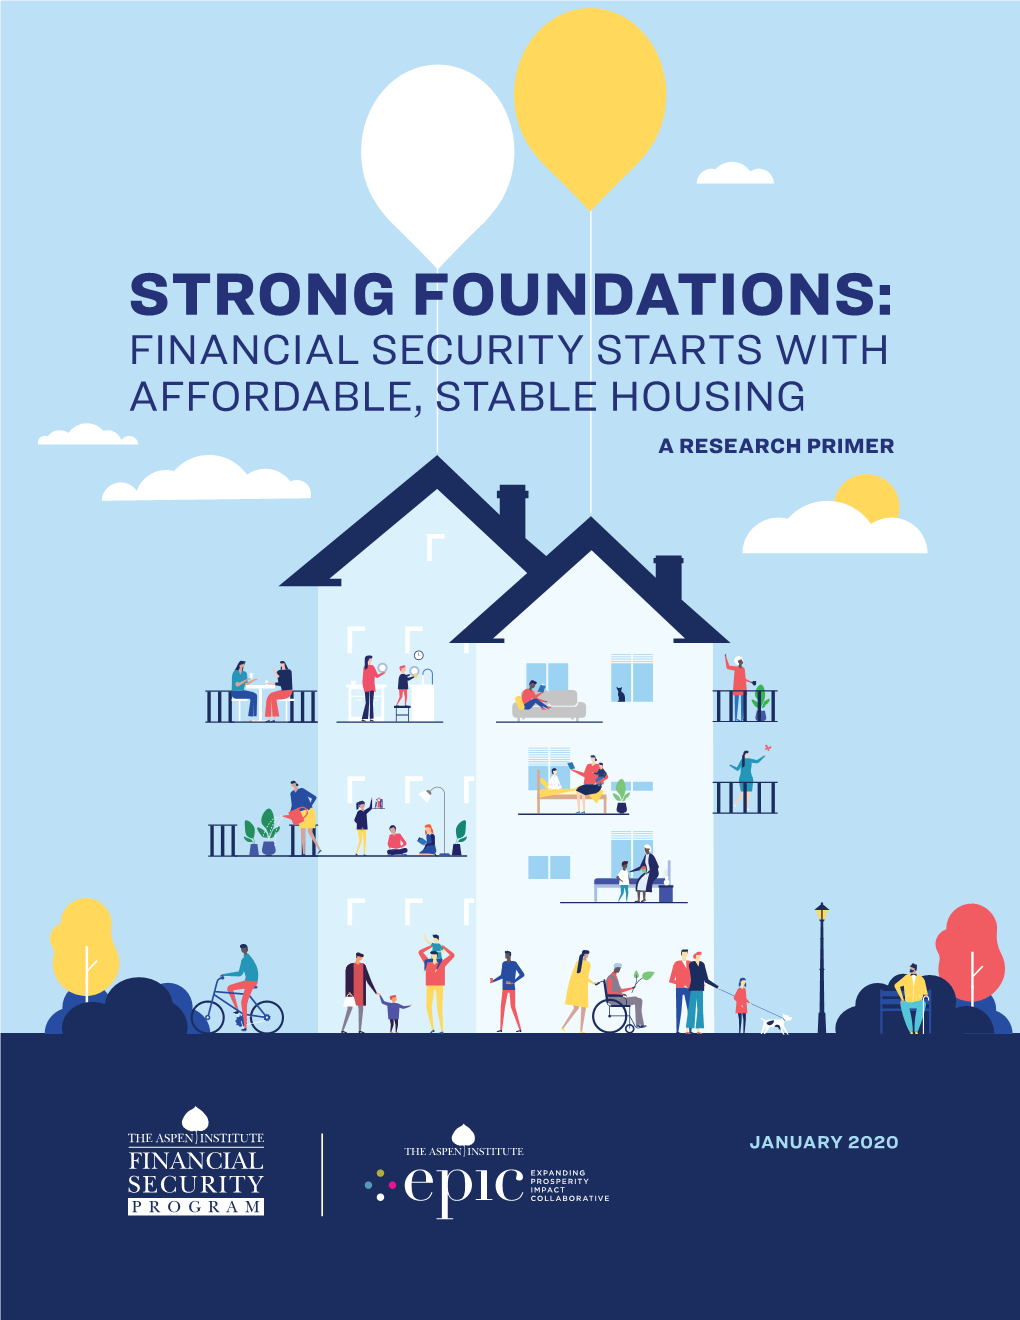 Strong Foundations: Financial Security Starts with Affordable, Stable Housing a Research Primer